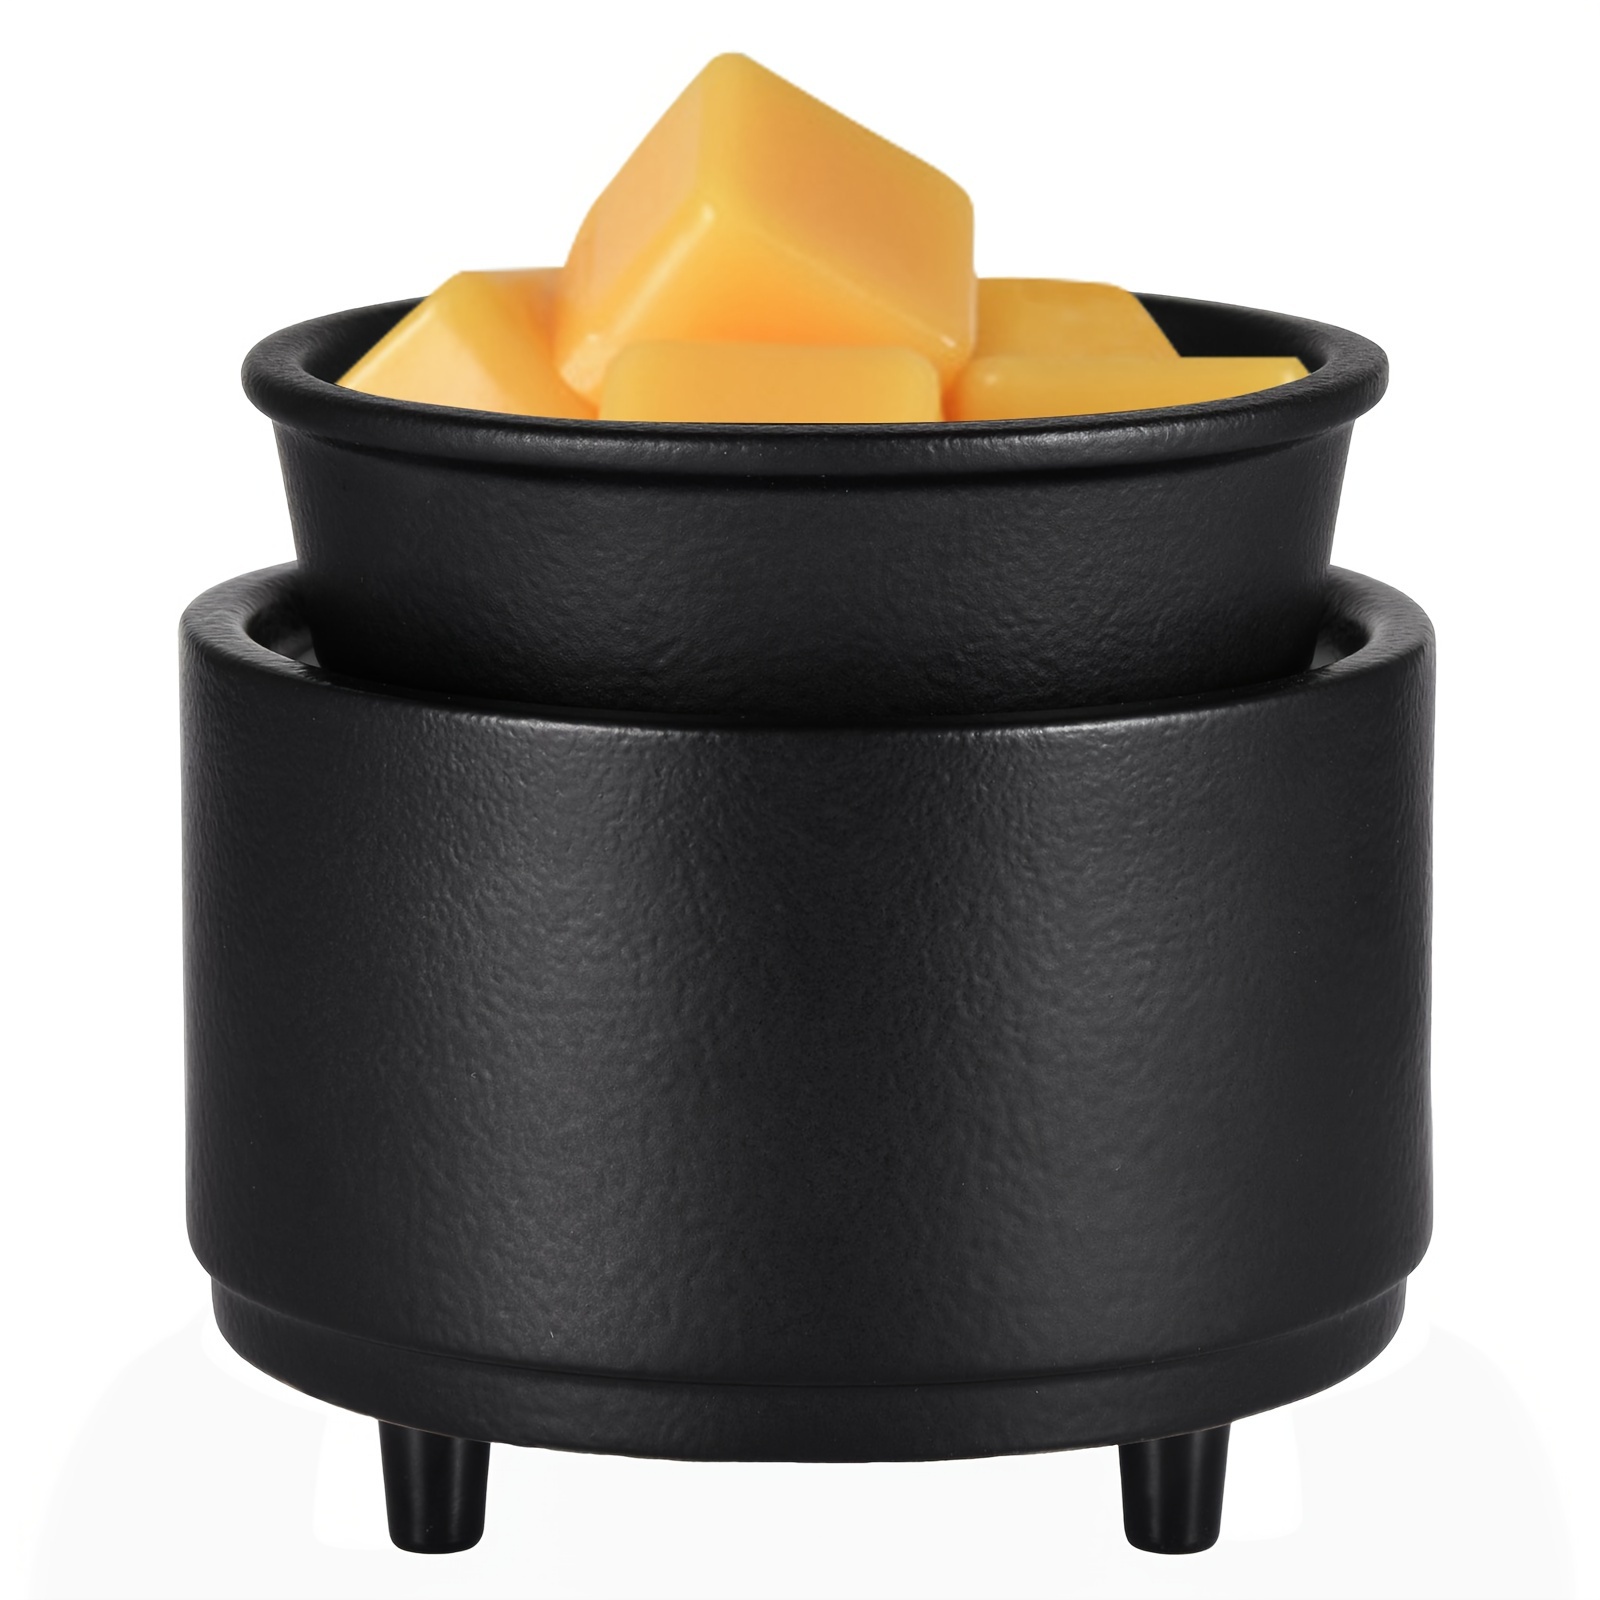 New Double Wax Warmer - Dual Wax Melting in Four Stylish Colors